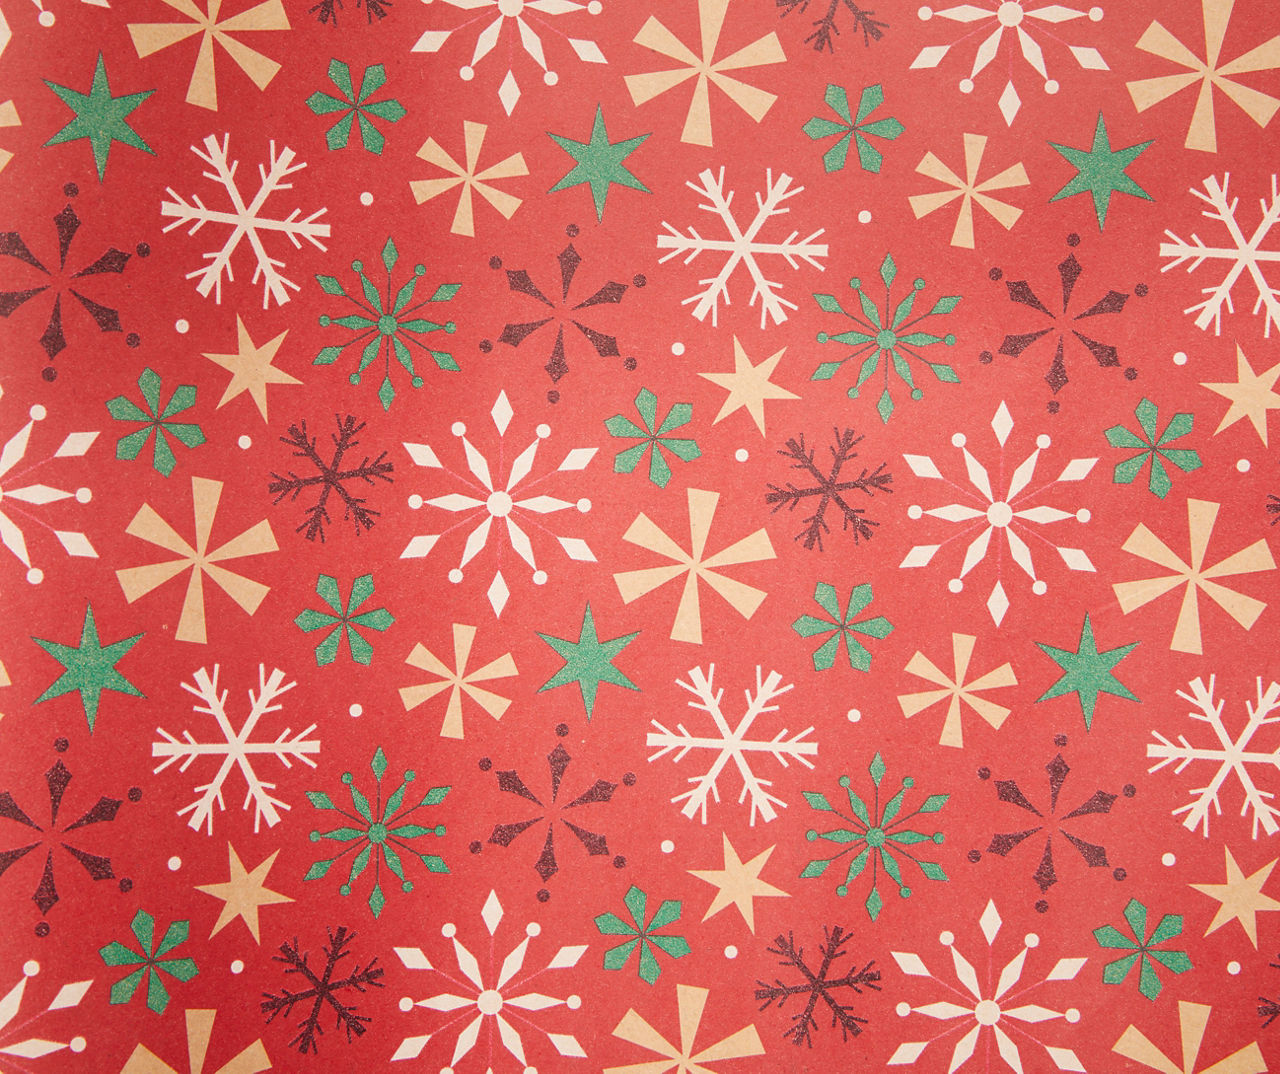 Kraft Paper Gift Wrap Christmas Wrapping Paper Santa Claus Snowflake  Pattern Artware Kraft Decorative Packaging PaperGift From Swgszhe, $7.39